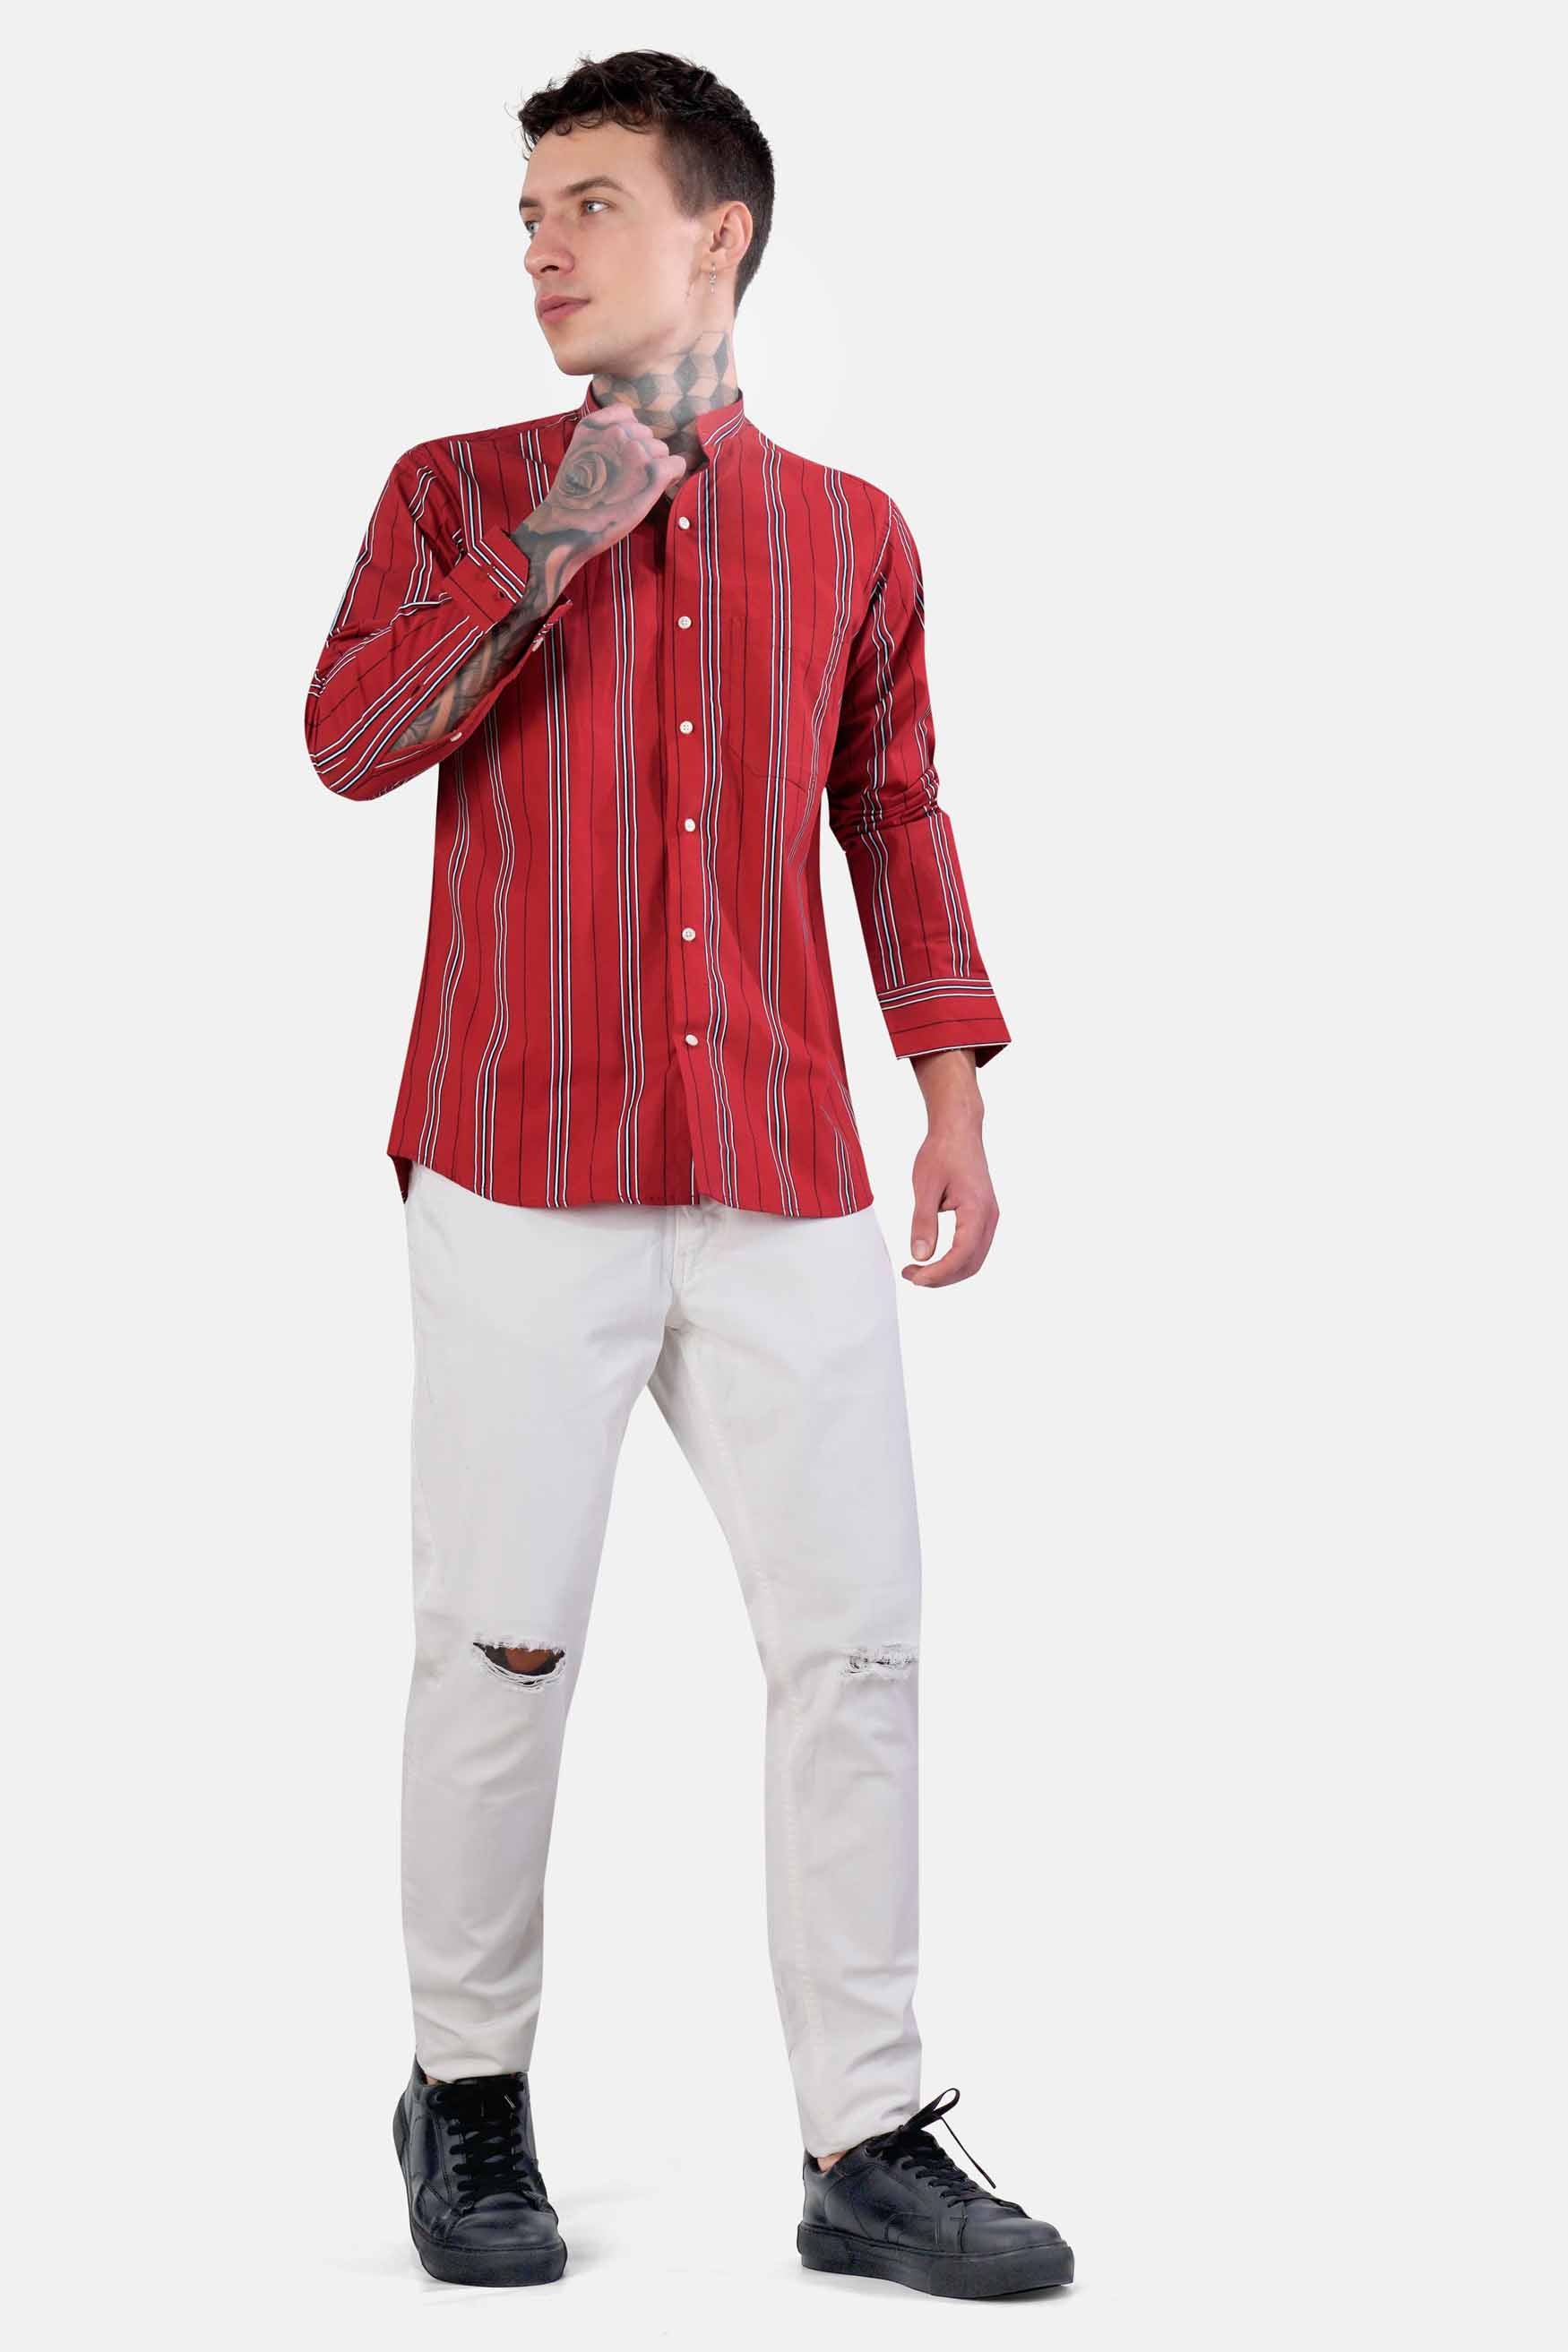 Cardinal Red with White and Cove Blue Striped Twill Premium Cotton Shirt